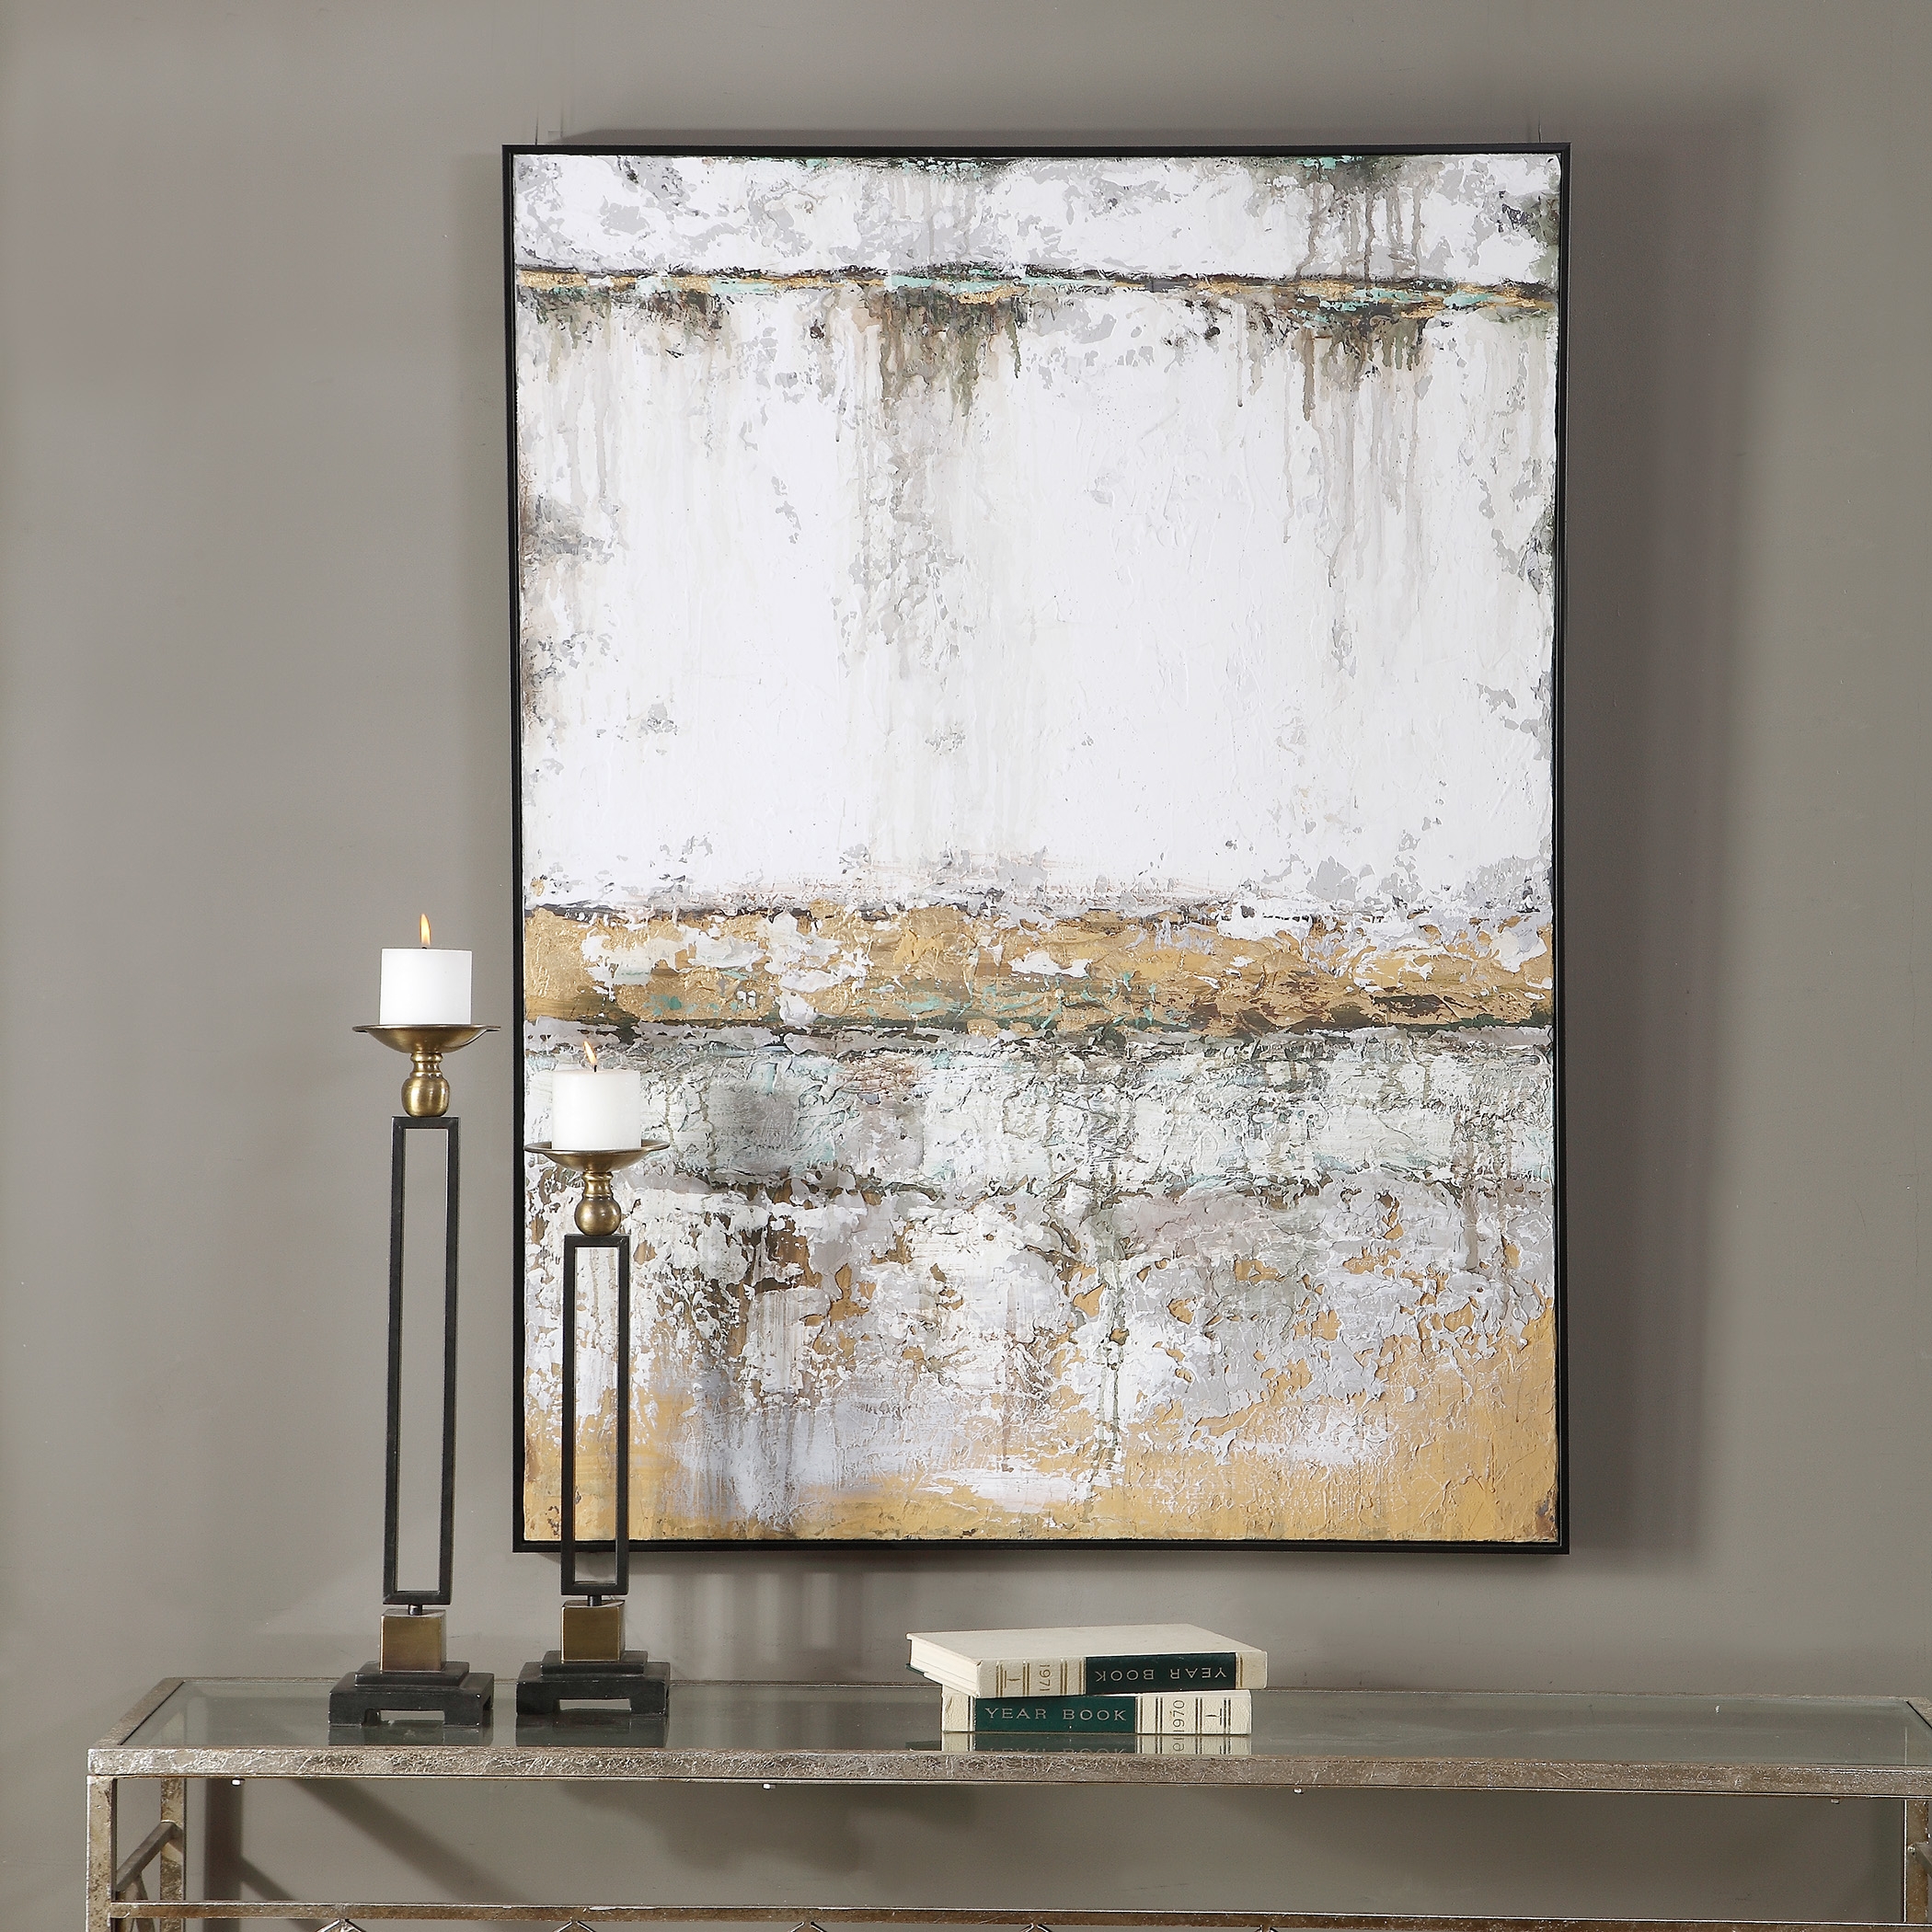 The Wall Abstract Art, 36" x 47.75" - DISCONTINUED - Image 1